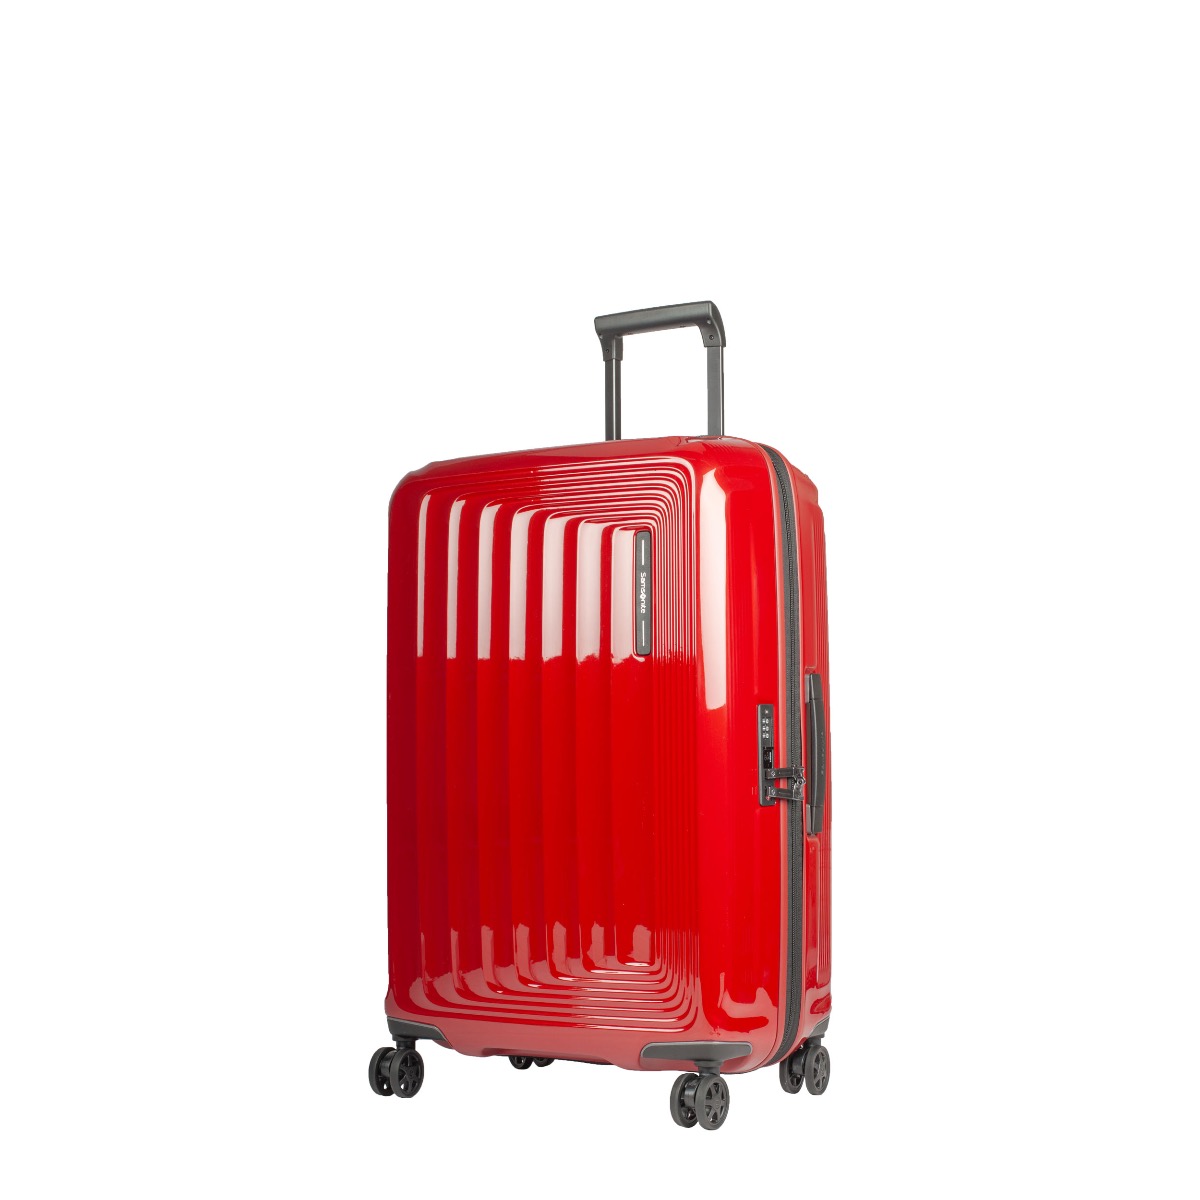 Valise 69cm extensible - Nuon